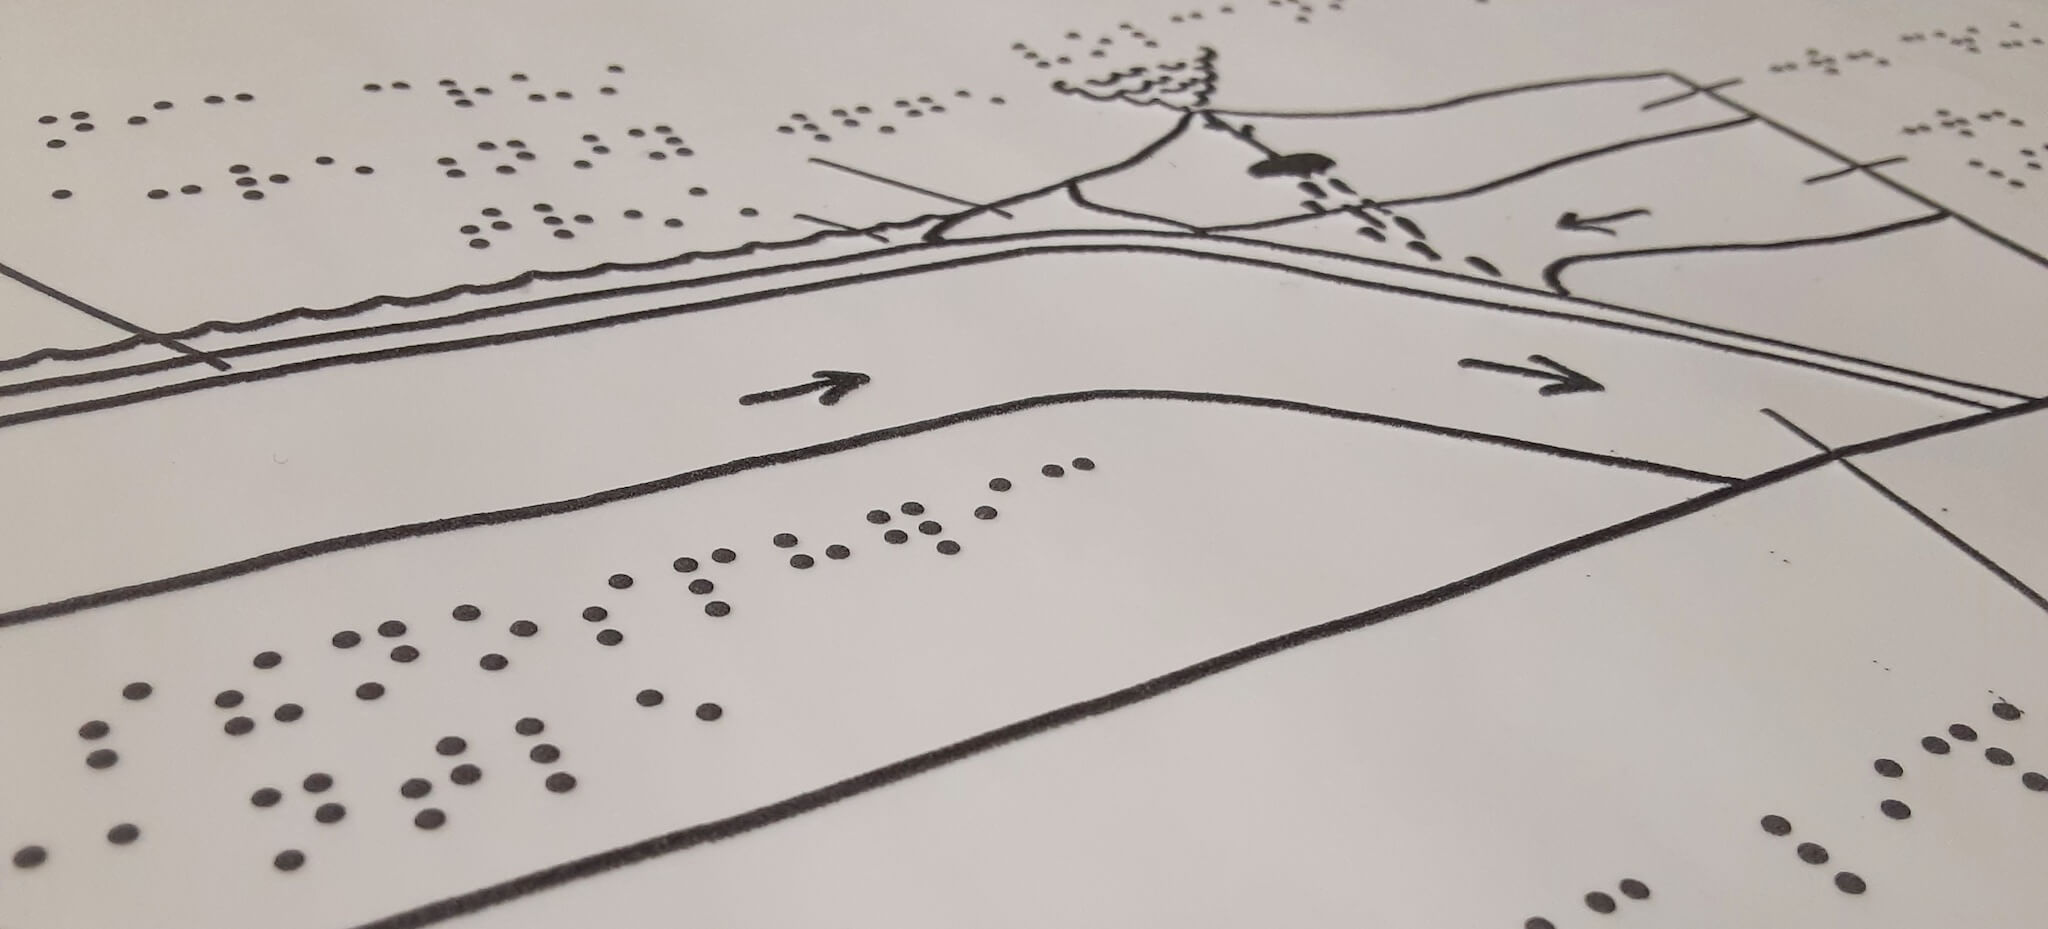 Rock cycle image printed in braille font